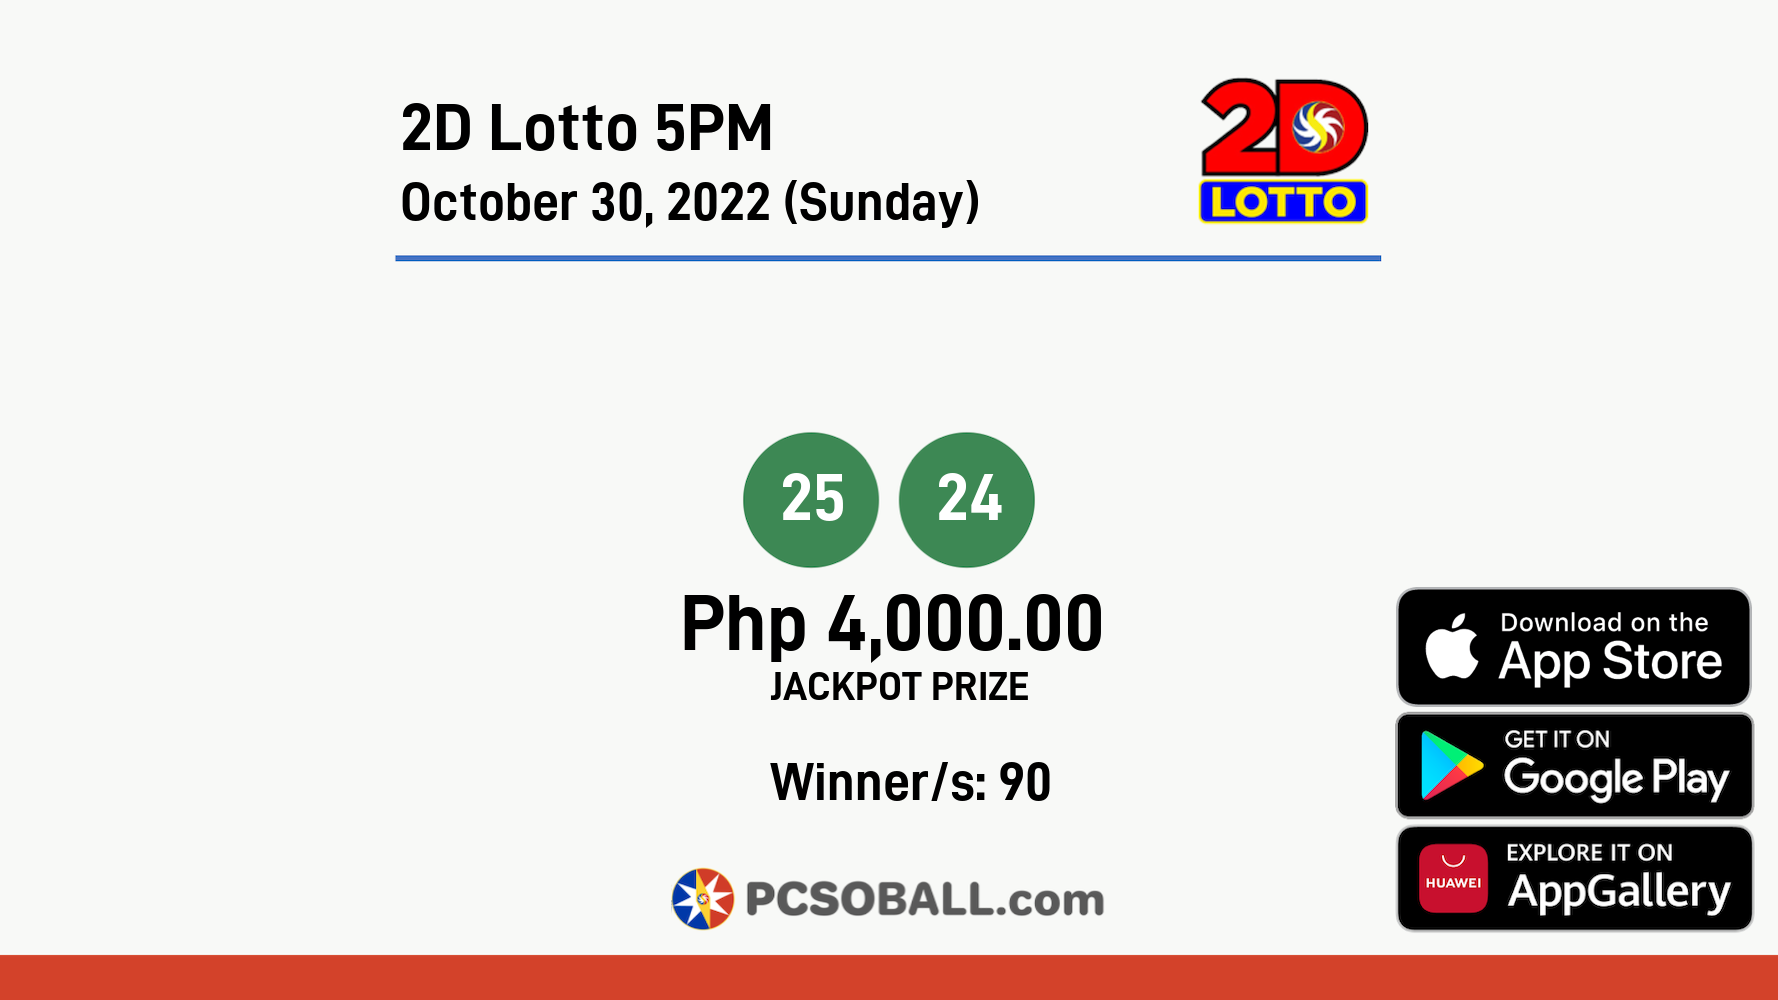 2D Lotto 5PM October 30, 2022 (Sunday) Result